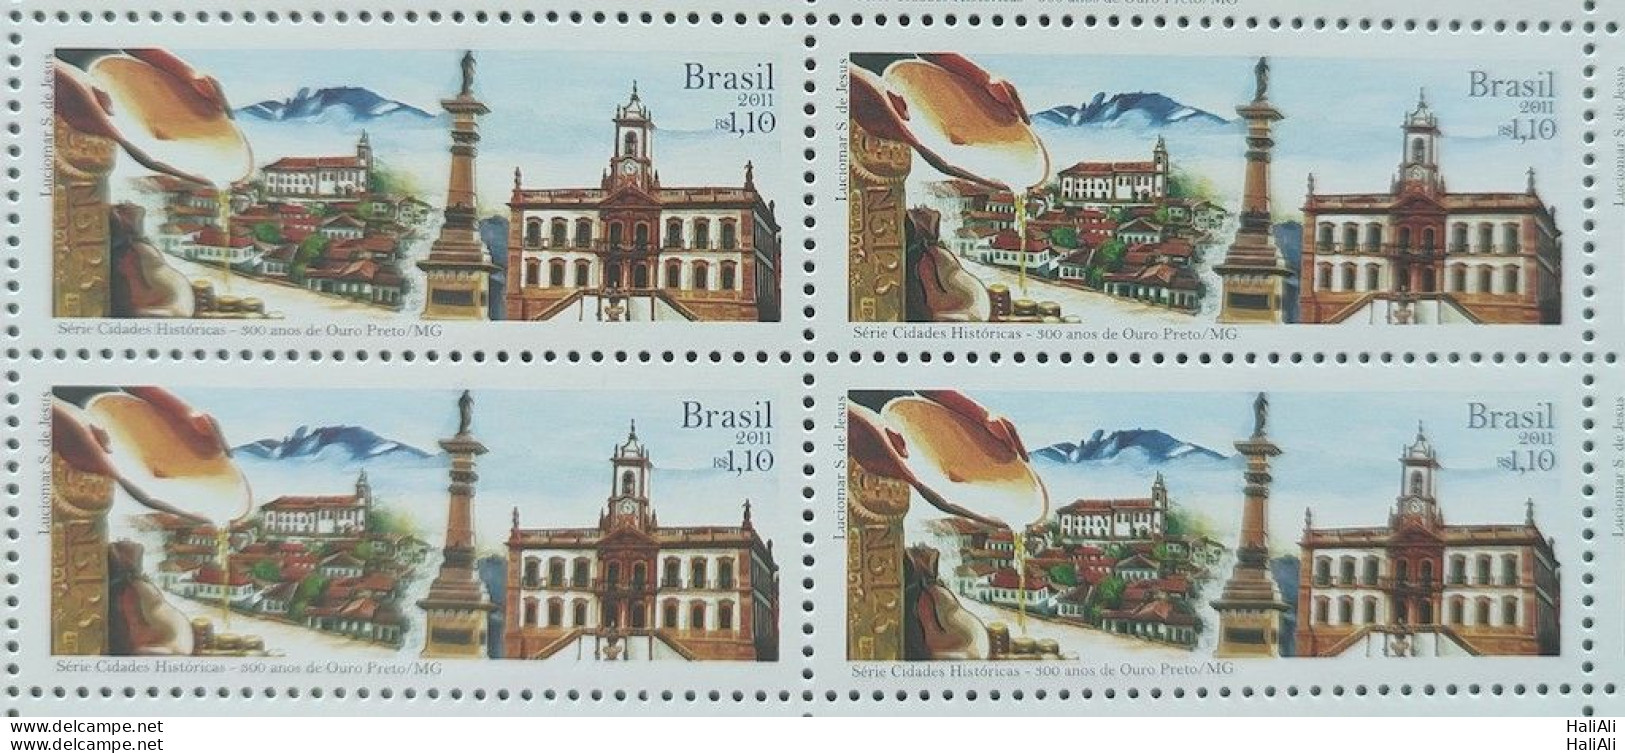 C 3097 Brazil Stamp Historical Cities Ouro Preto MG 2011 Block Of 4 - Neufs